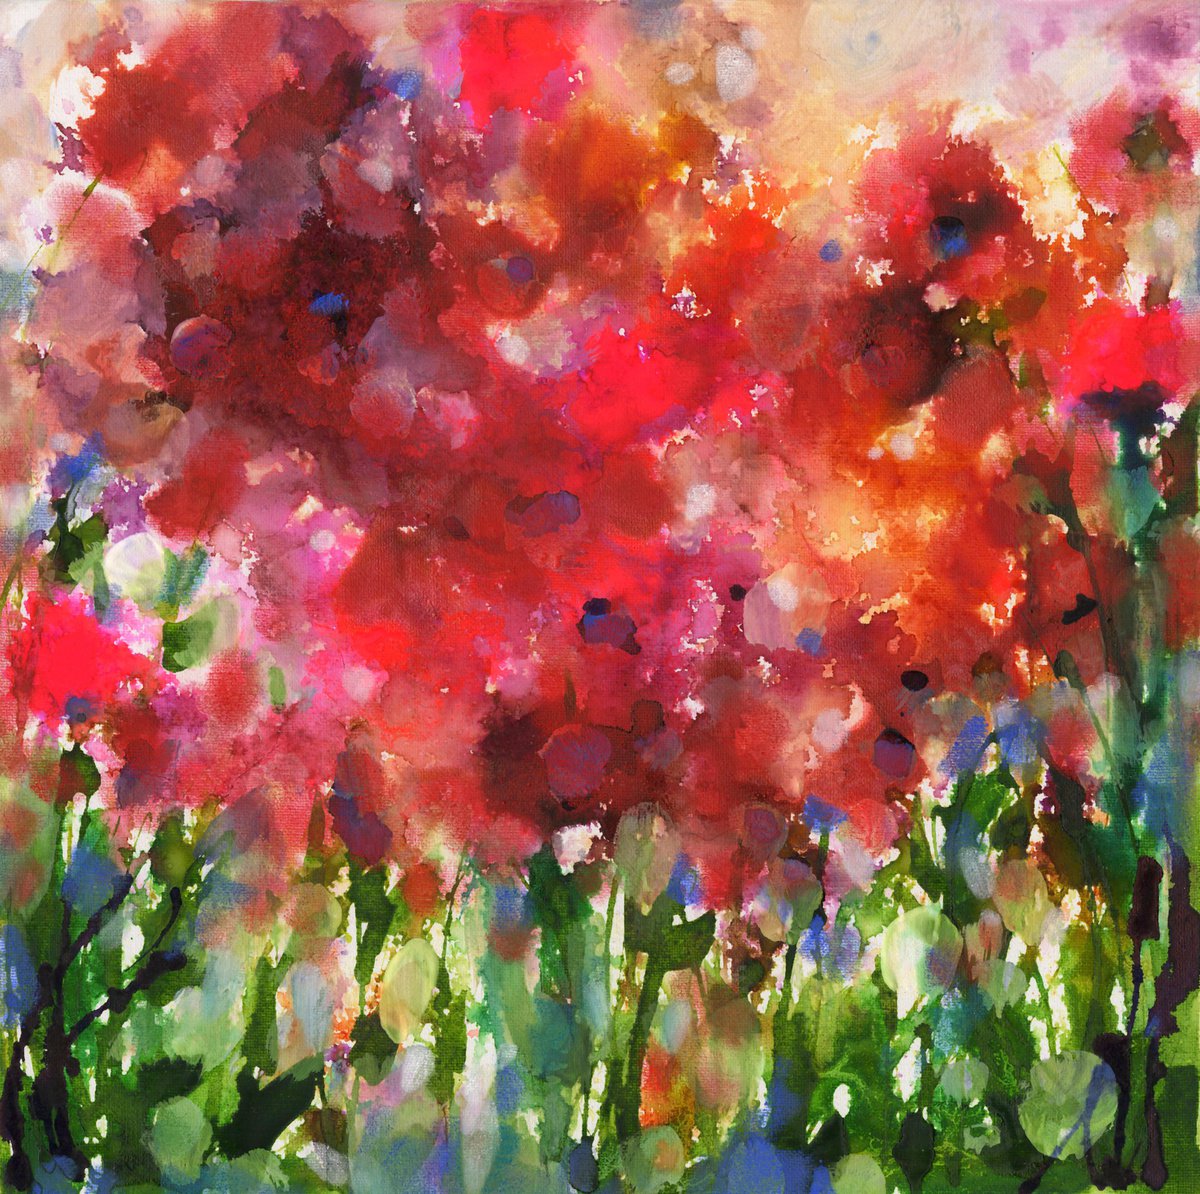 A Day In The Garden 3 - Flower Painting by Kathy Morton Stanion by Kathy Morton Stanion